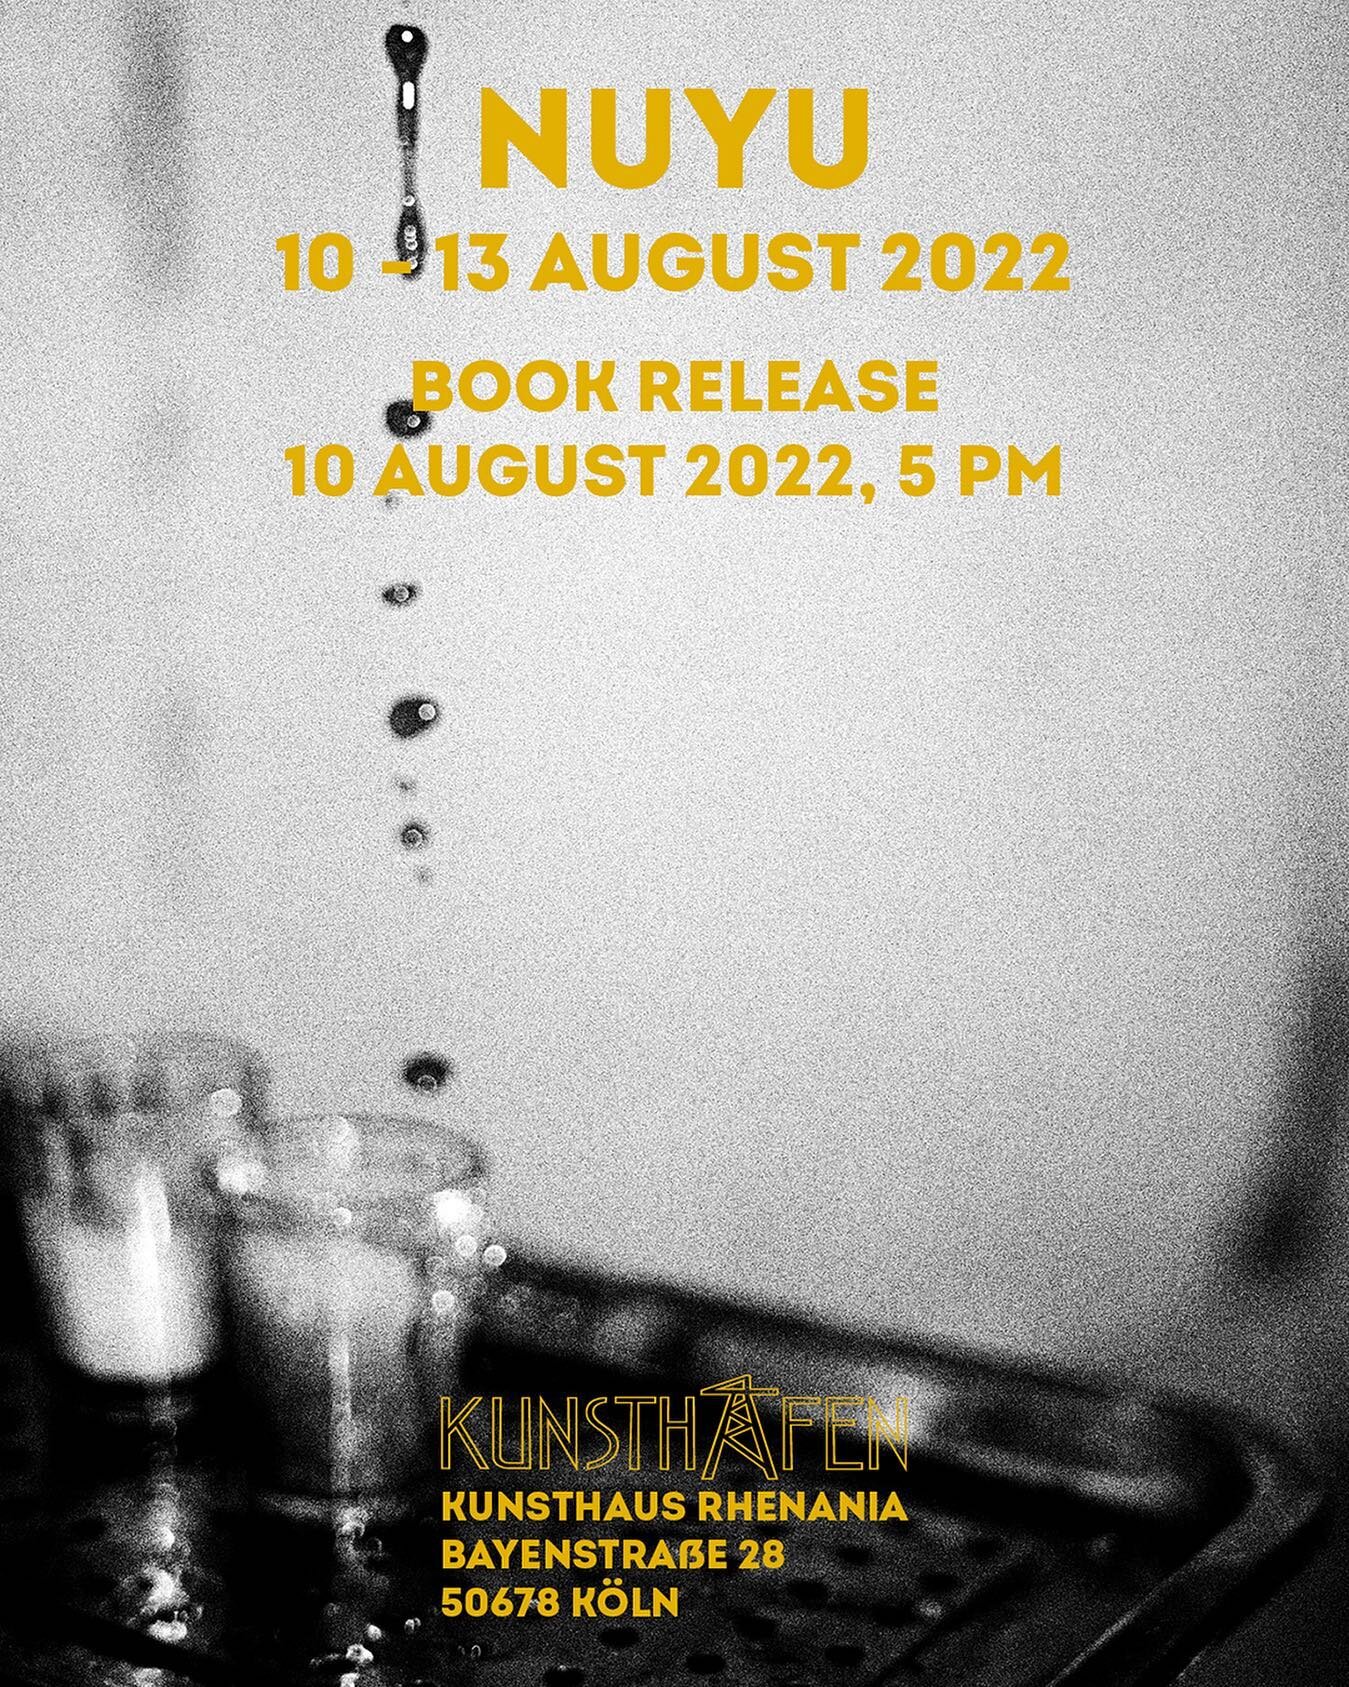 I am happy to invite you to my upcoming book release and exibition in Kunsthafen Cologne on the 10th of August 2022. 
I would love to see you around to celebrate NUYU. 
Let&rsquo;s meet and enjoy some time together. 
Looking forward to all of you.

h